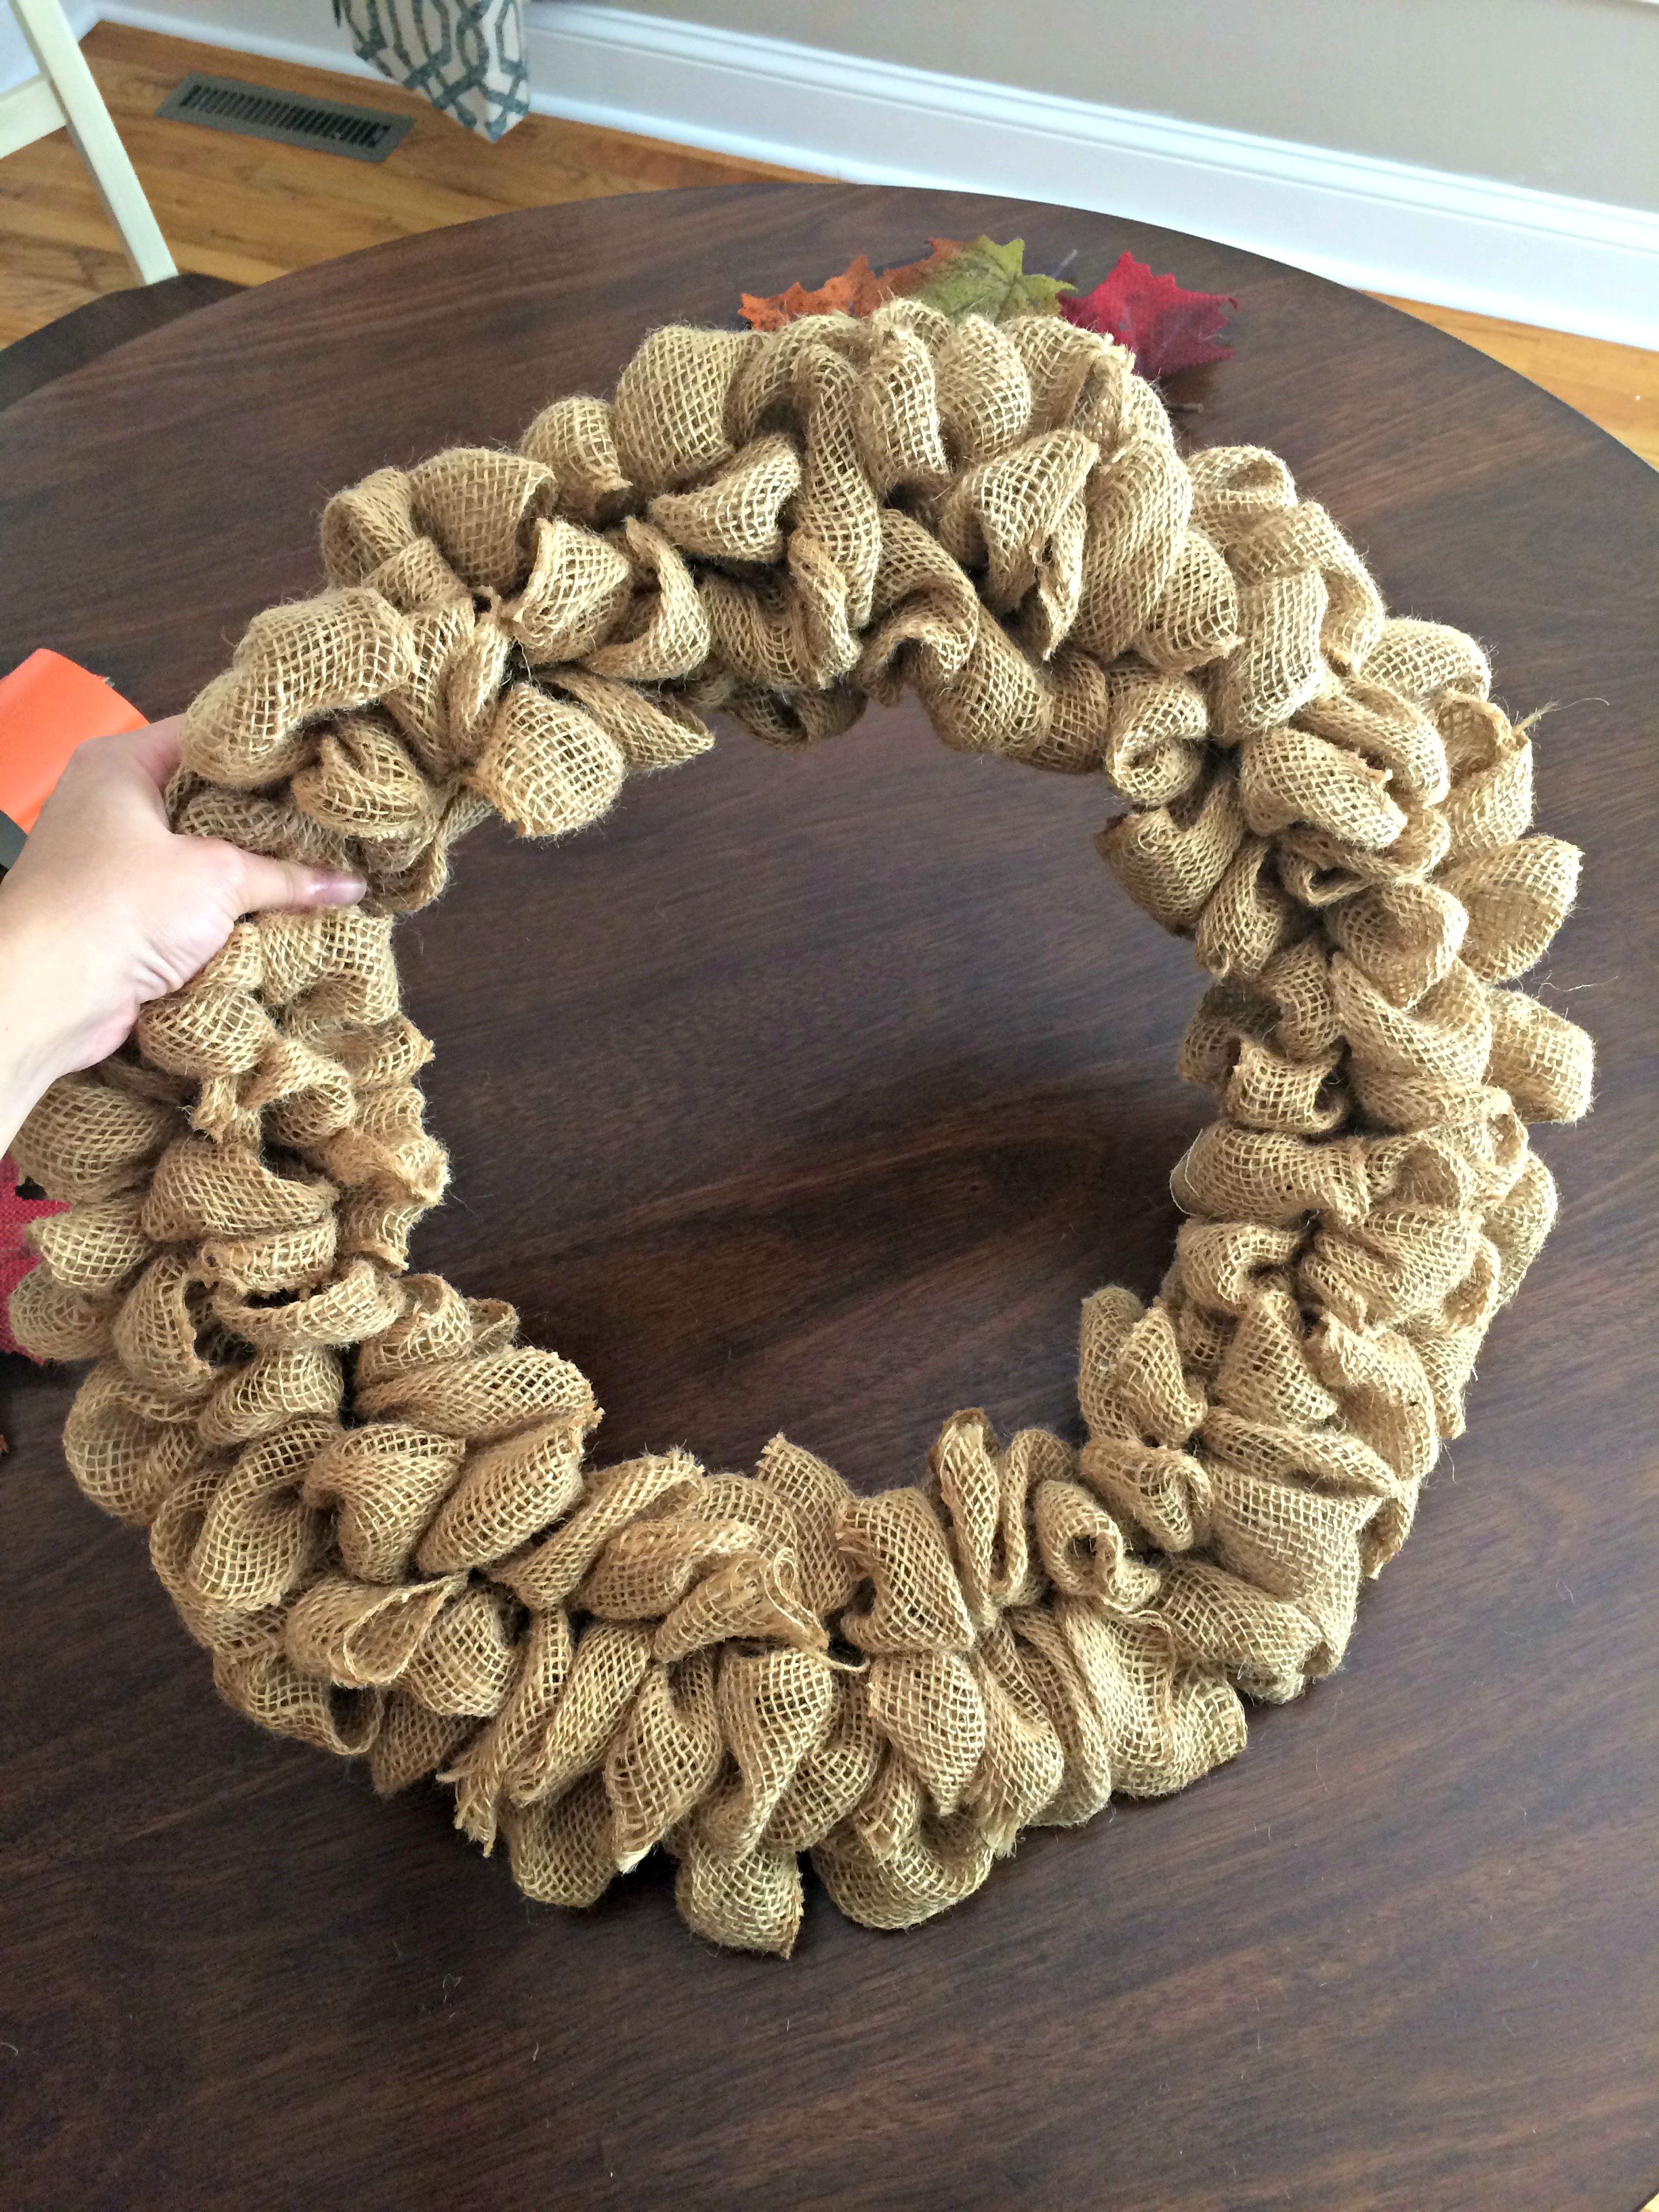 This rustic fall burlap bubble wreath is simple, beautiful, easy to make, and involves just a few materials. Check out this post for the easy step-by-step tutorial! This rustic fall burlap bubble wreath is simple, beautiful, easy to make, and involves just a few materials. Check out this post for the easy step-by-step tutorial! 